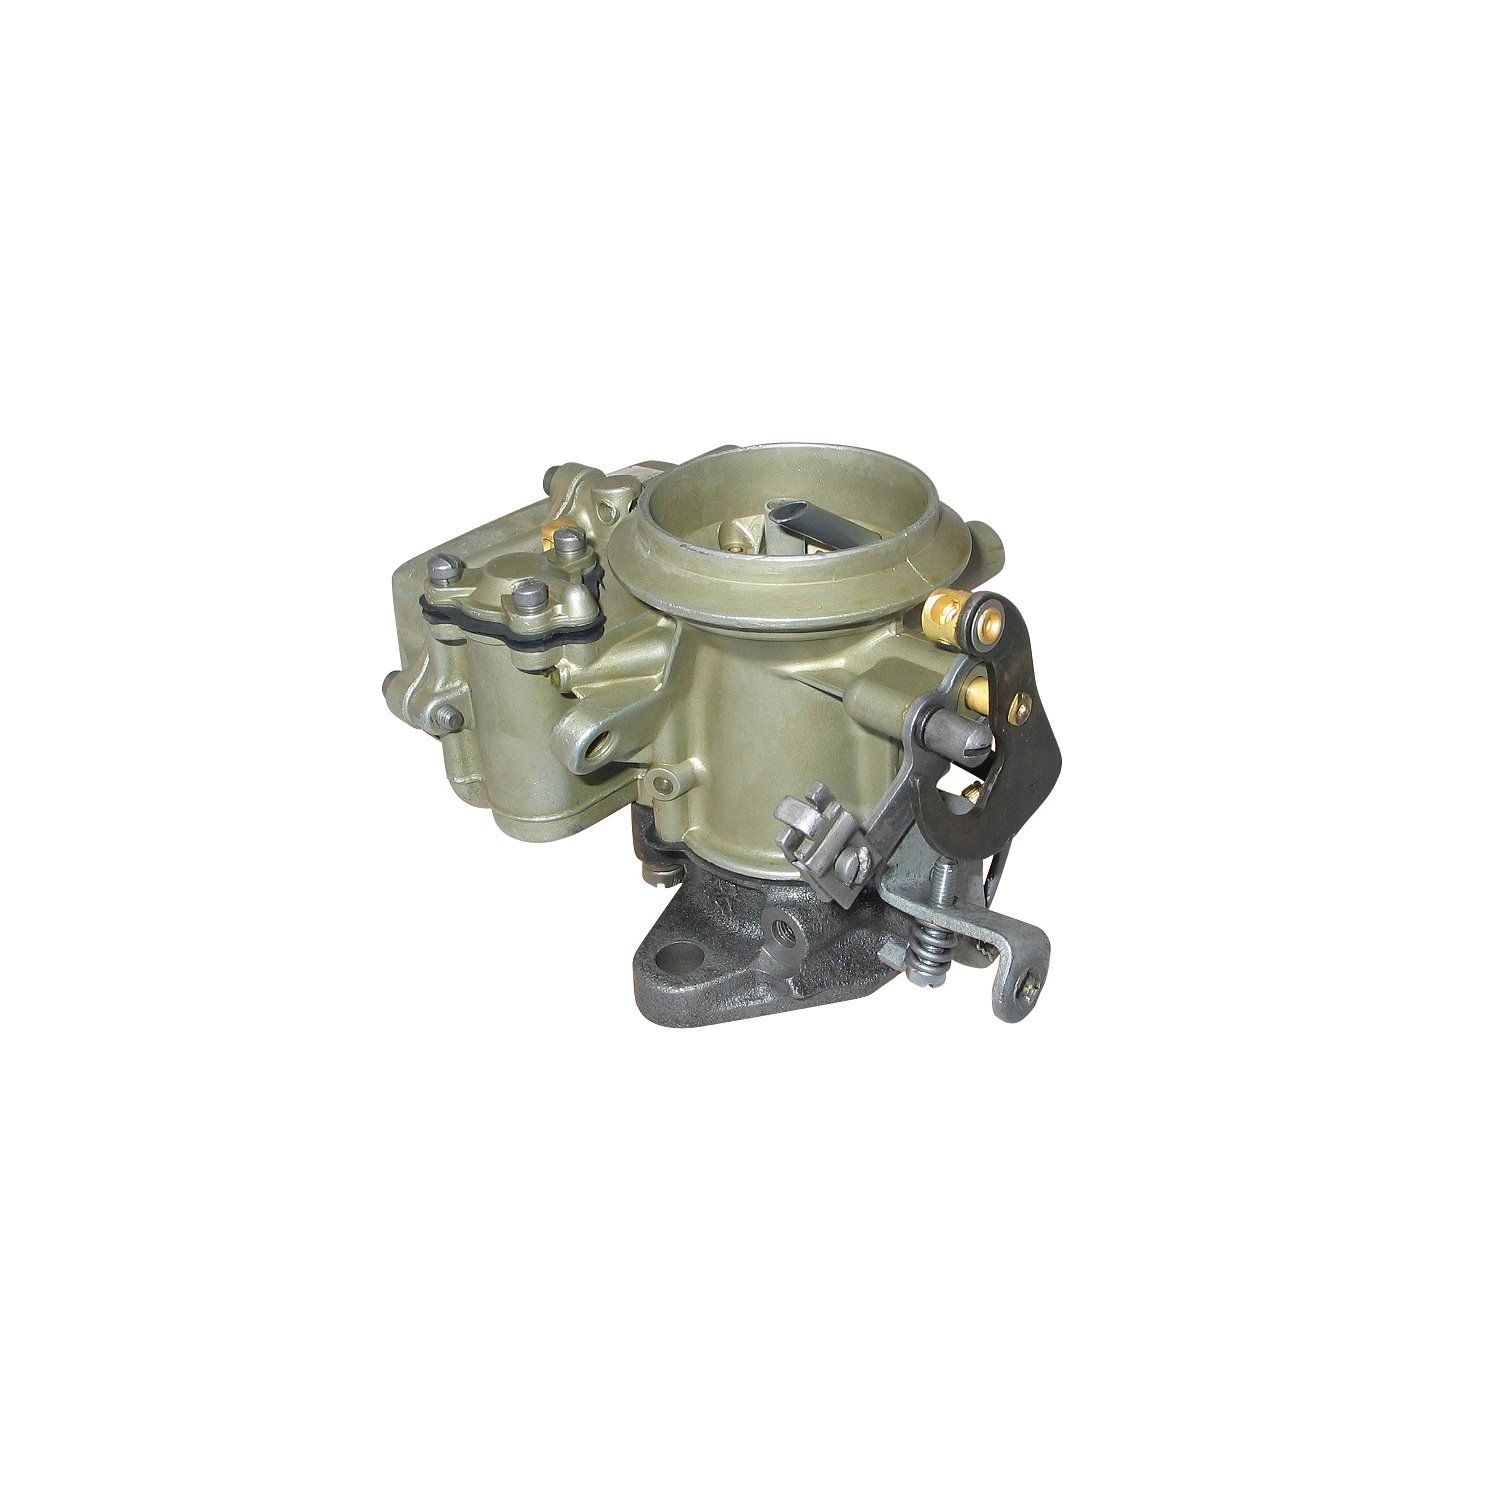 9-905 Holley Remanufactured Carburetor, 1940-Style